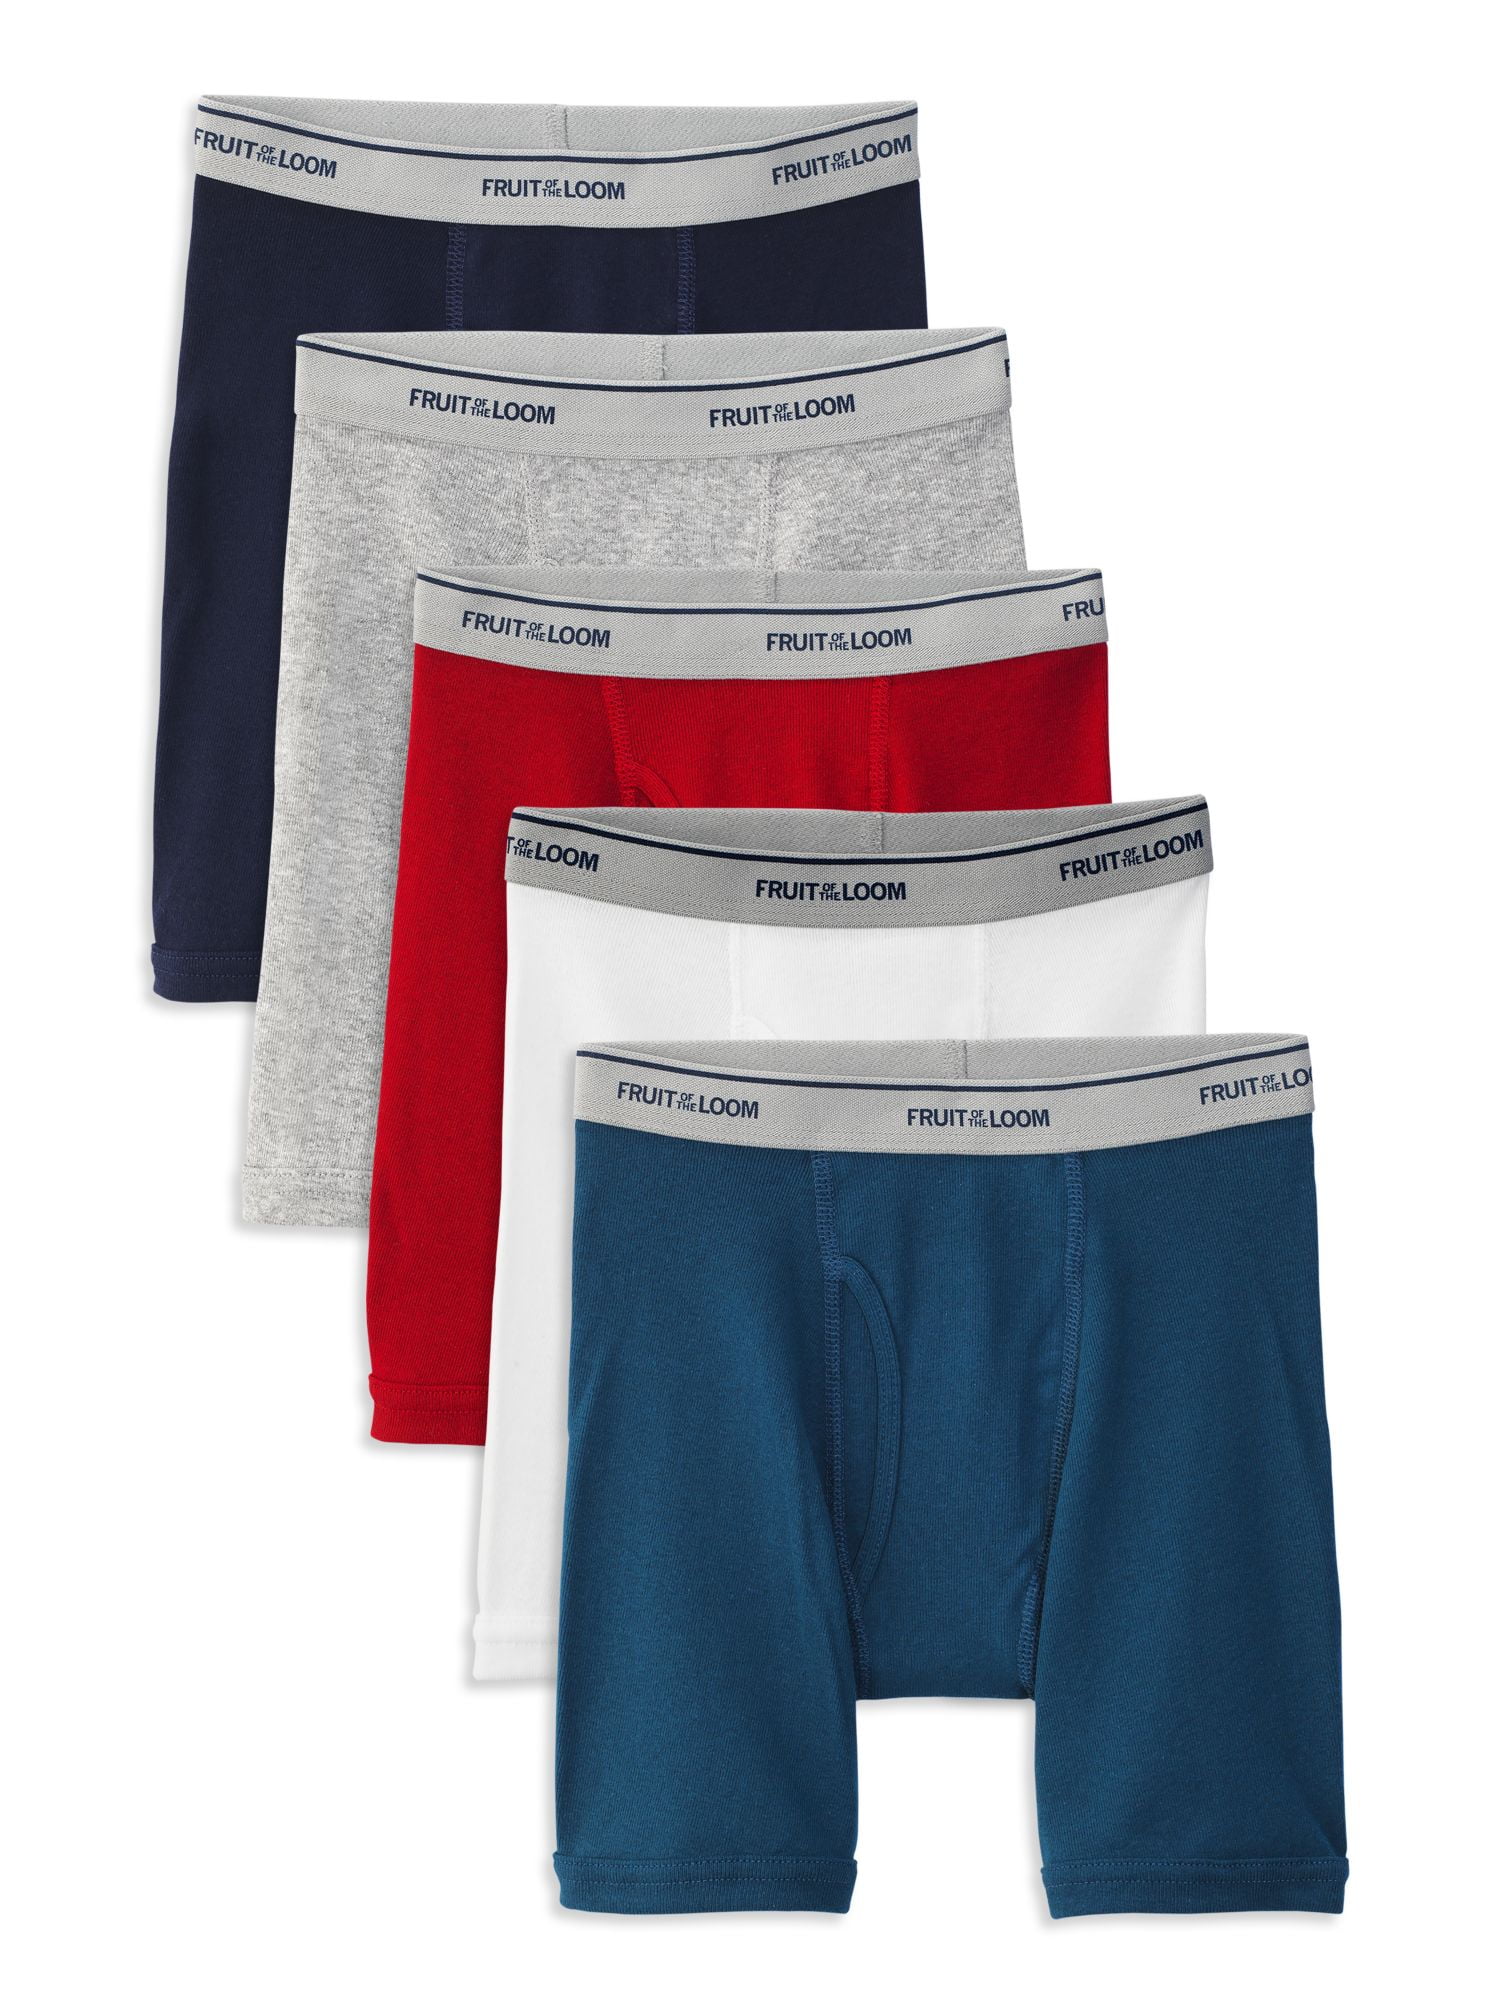 Fruit of the Loom Toddler Boys` 5pk Assorted Prints Boxer Brief 